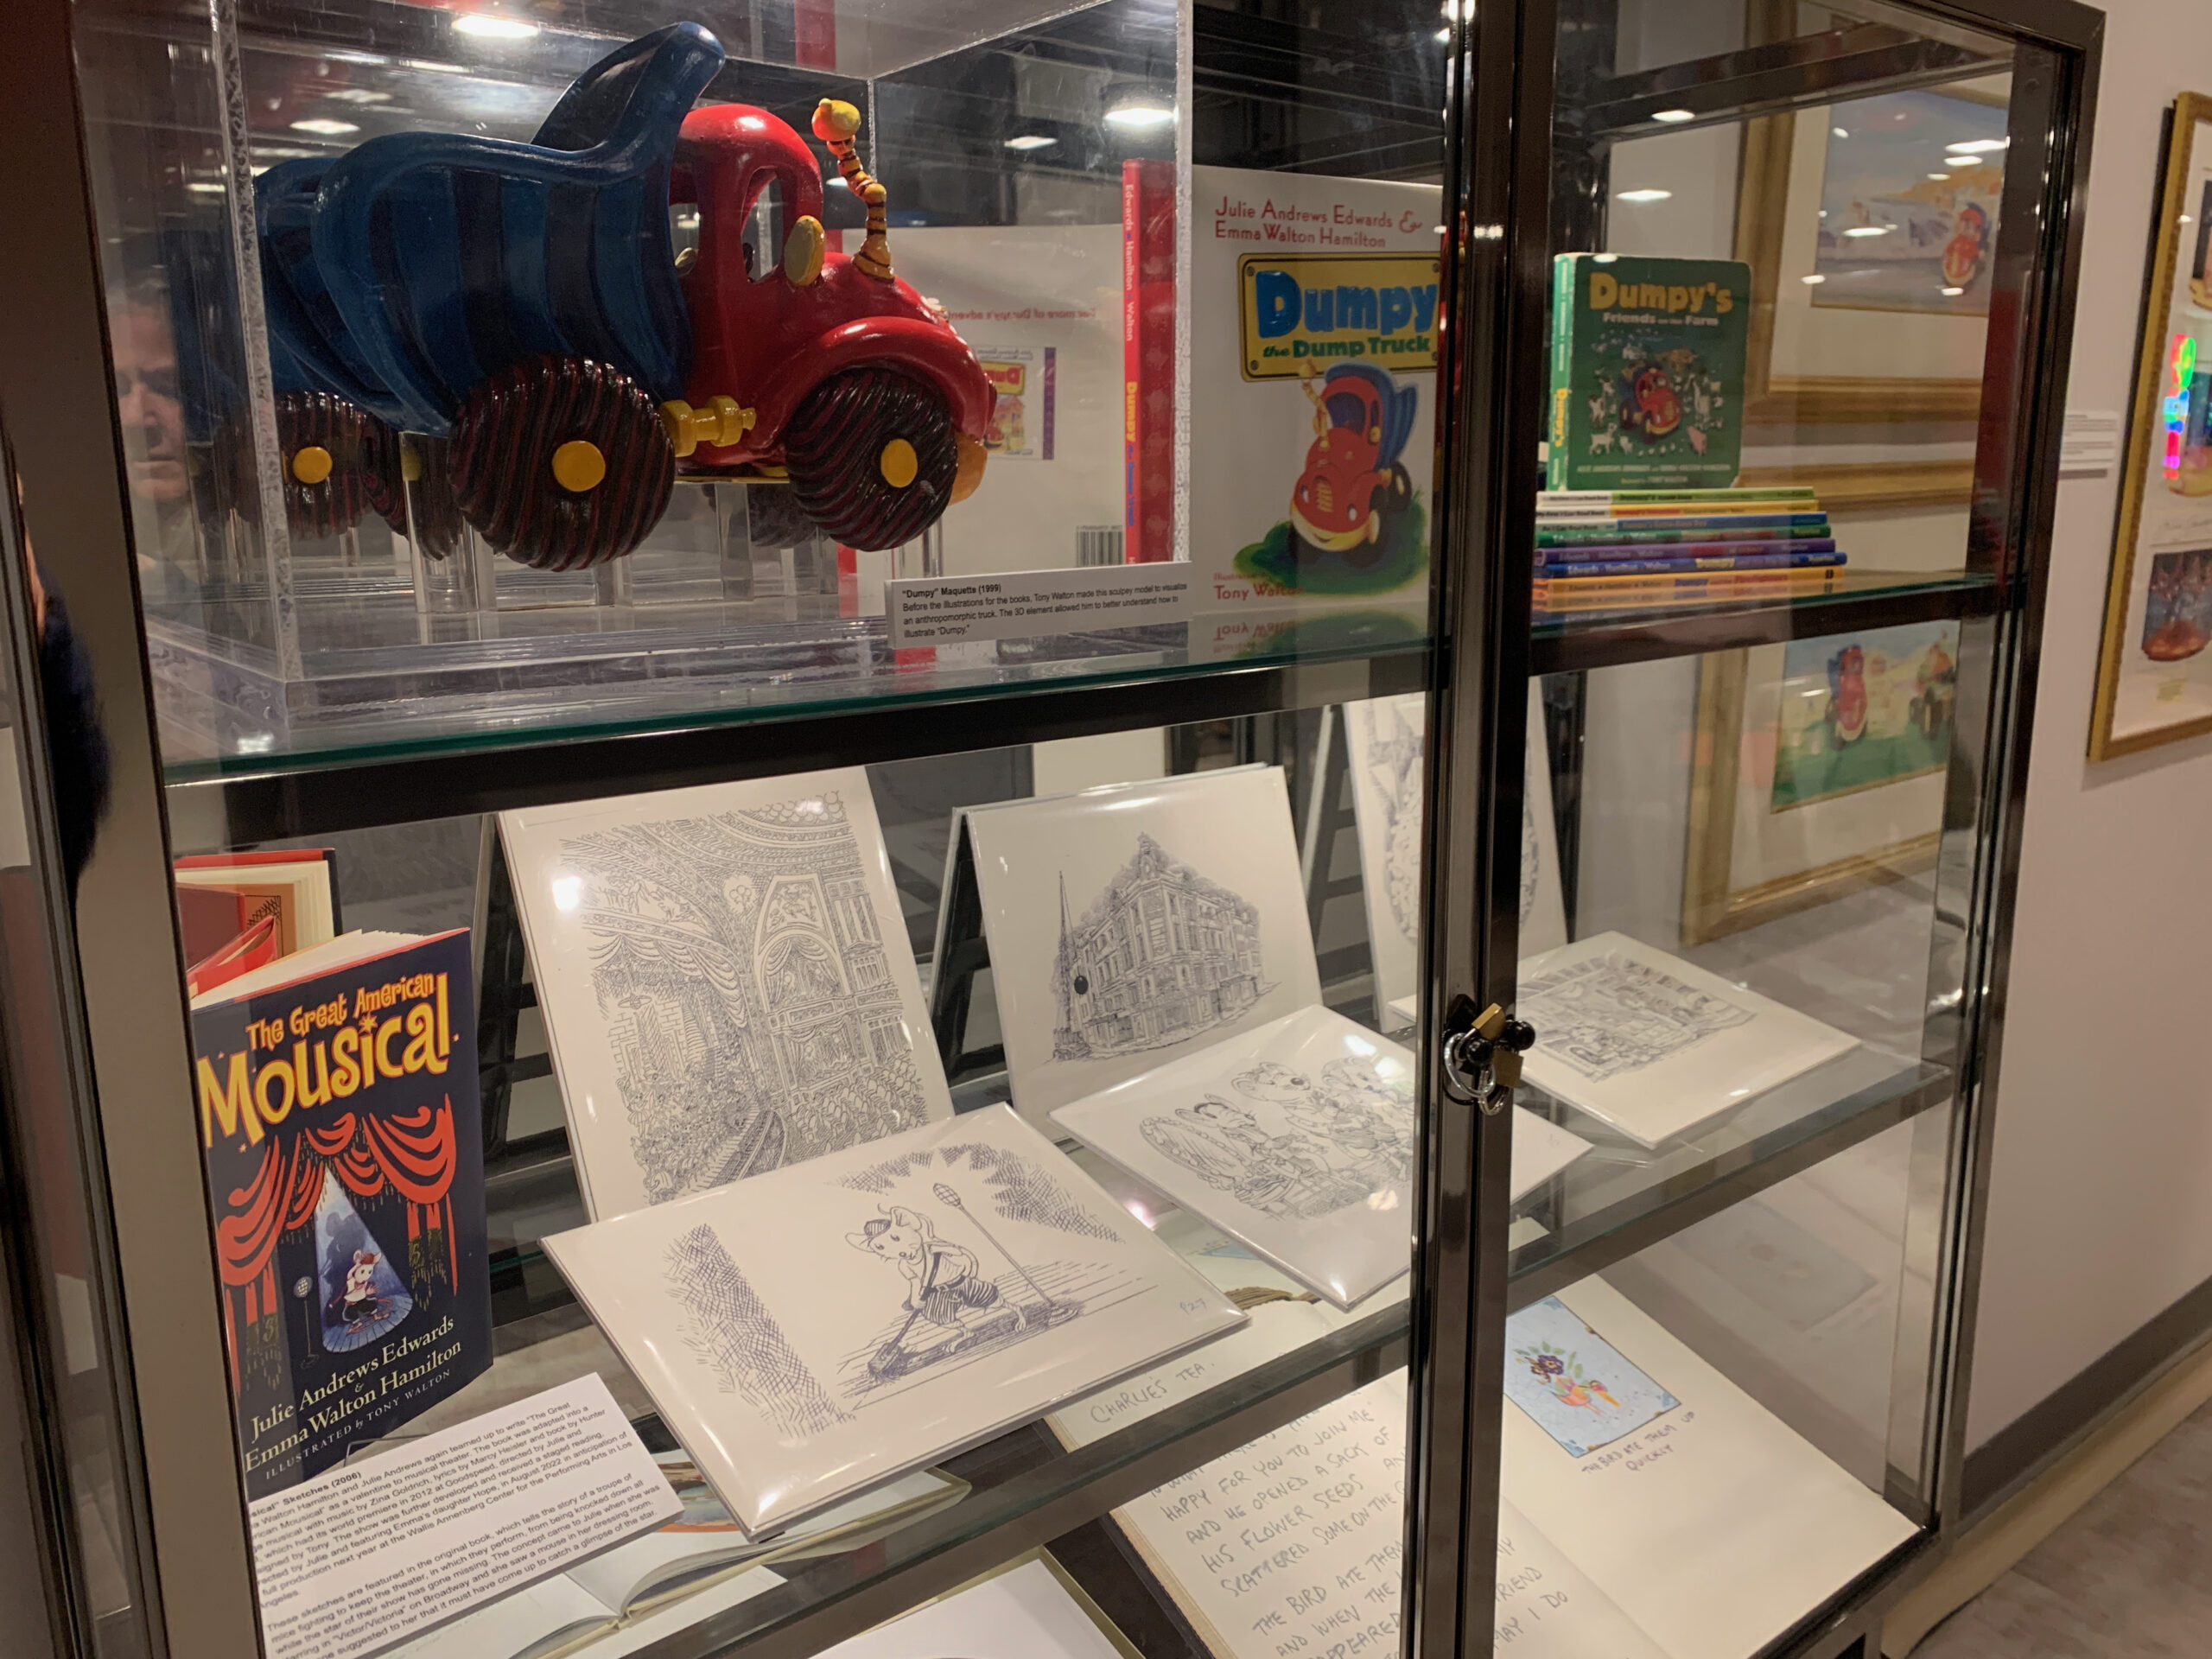 A display case highlighting children's books written as a collaboration between Emma Walton Hamilton and her parents Julie Andrews and Tony Walton. The objects are on view as part of 